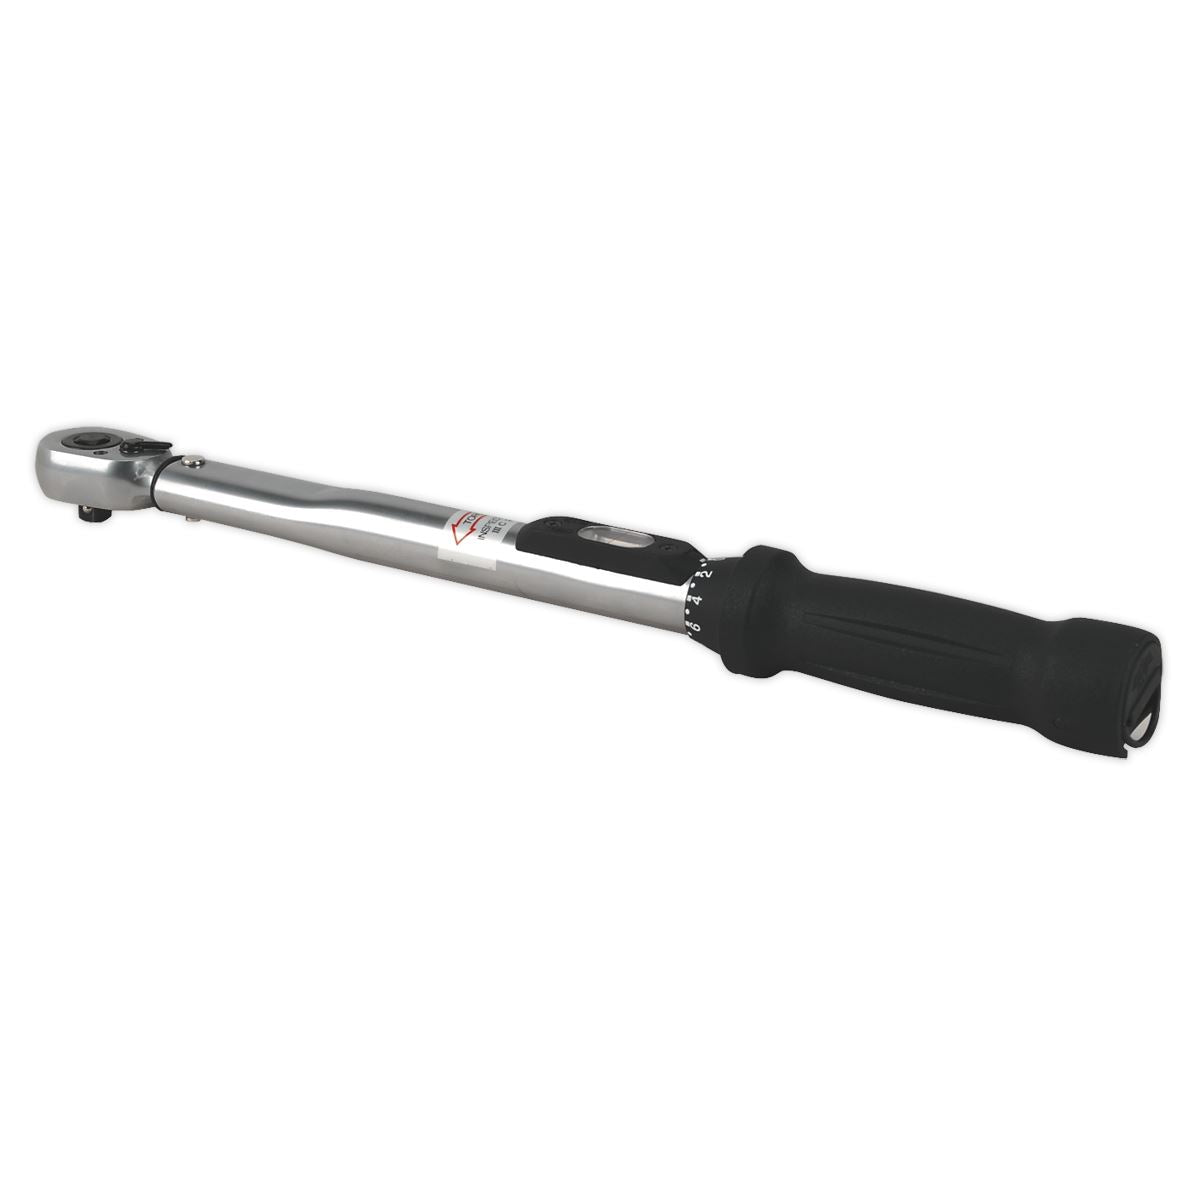 Sealey Premier Torque Wrench Locking Micrometer Style 3/8"Sq Drive10-110Nm(10-80lb.ft) Calibrated